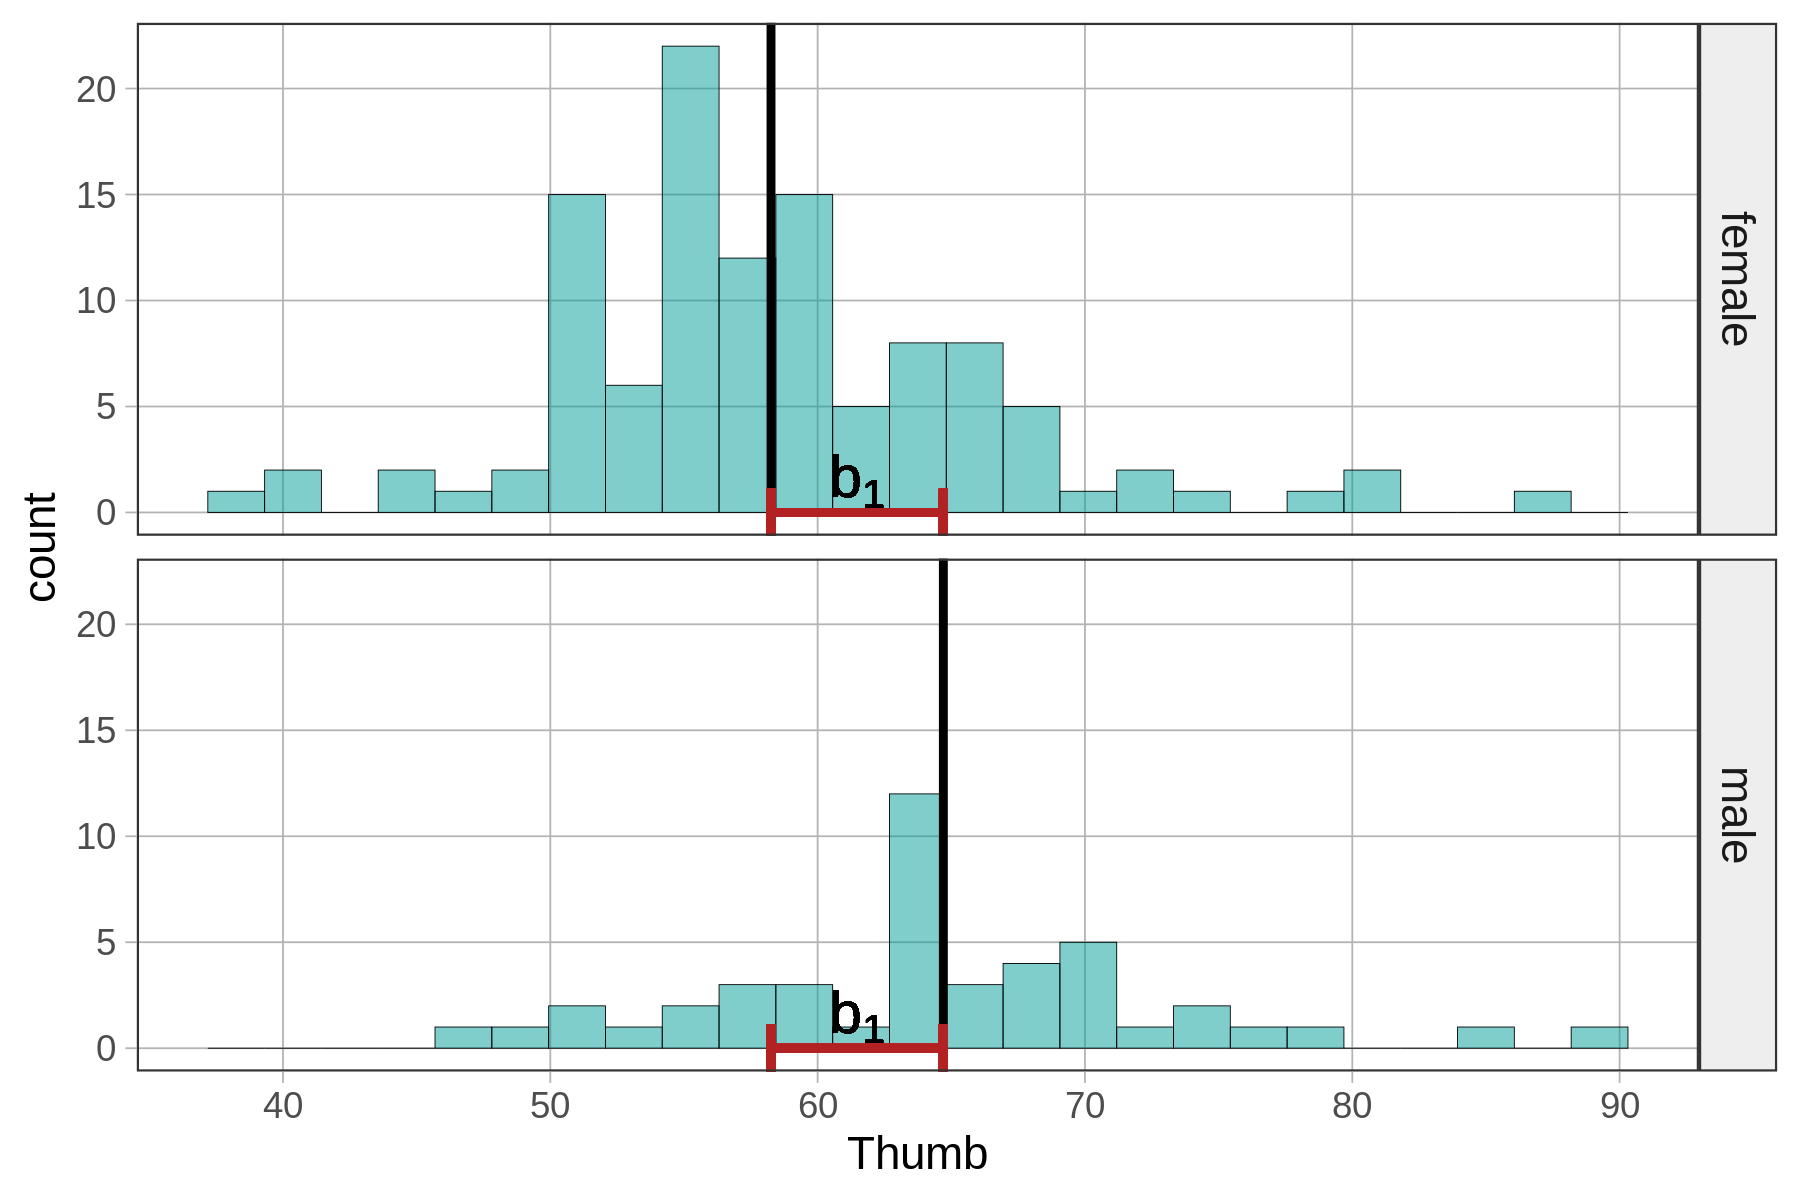 A faceted histogram of the distribution of Thumb by Sex on the left with vertical lines showing the mean for each Sex group. The mean for the male group is higher than the mean for the female group.